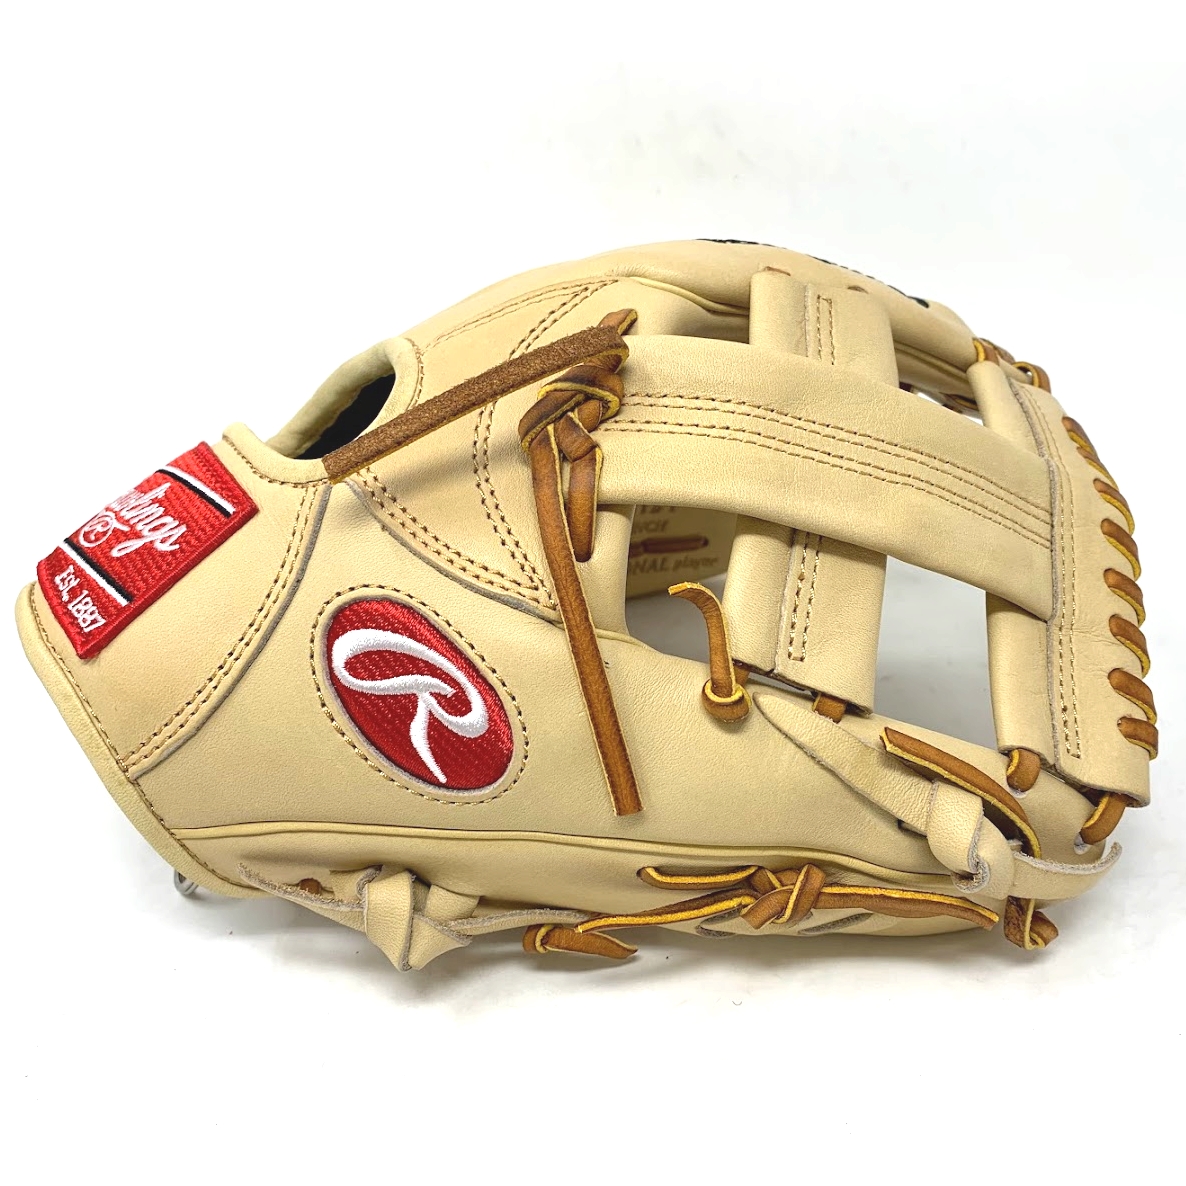 rawlings-heart-of-the-hide-pro-tt2-baseball-glove-11-5-camel-tan-laces-right-hand-throw PROTT2-CTAN-RightHandThrow Rawlings  Elevate your game with the limited-edition Rawlings Heart of the Hide